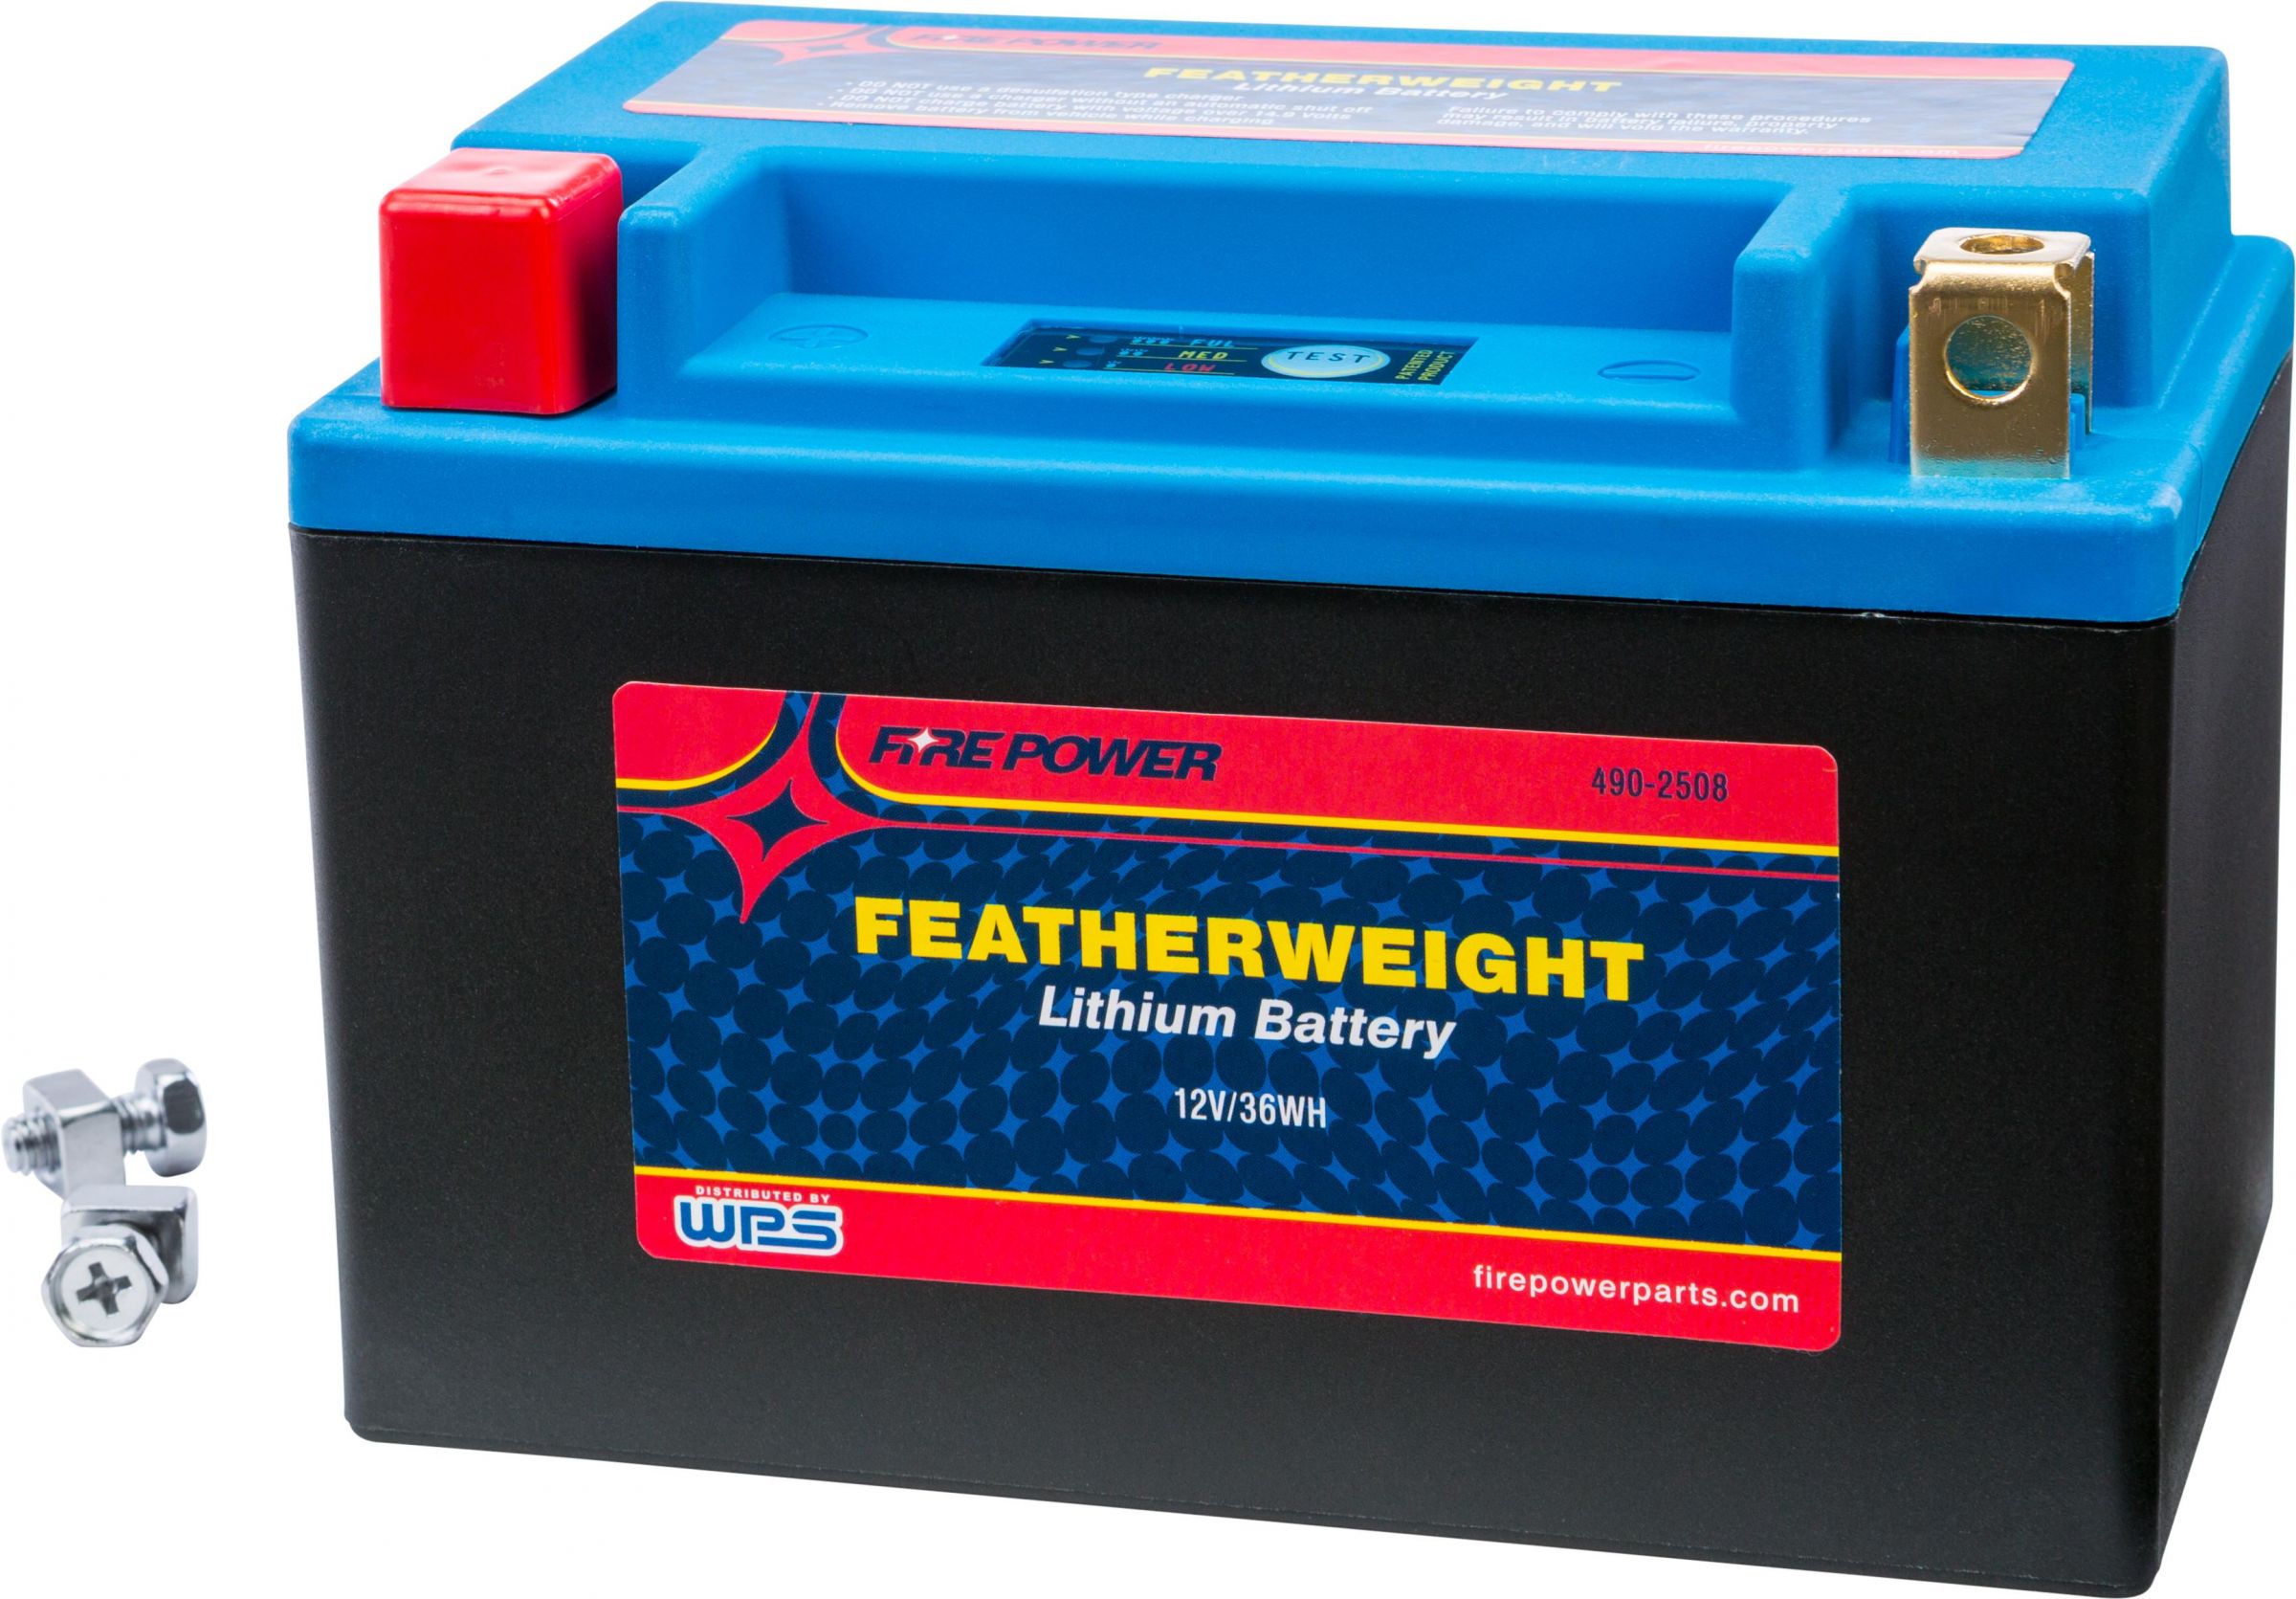 Firepower lithium ion battery